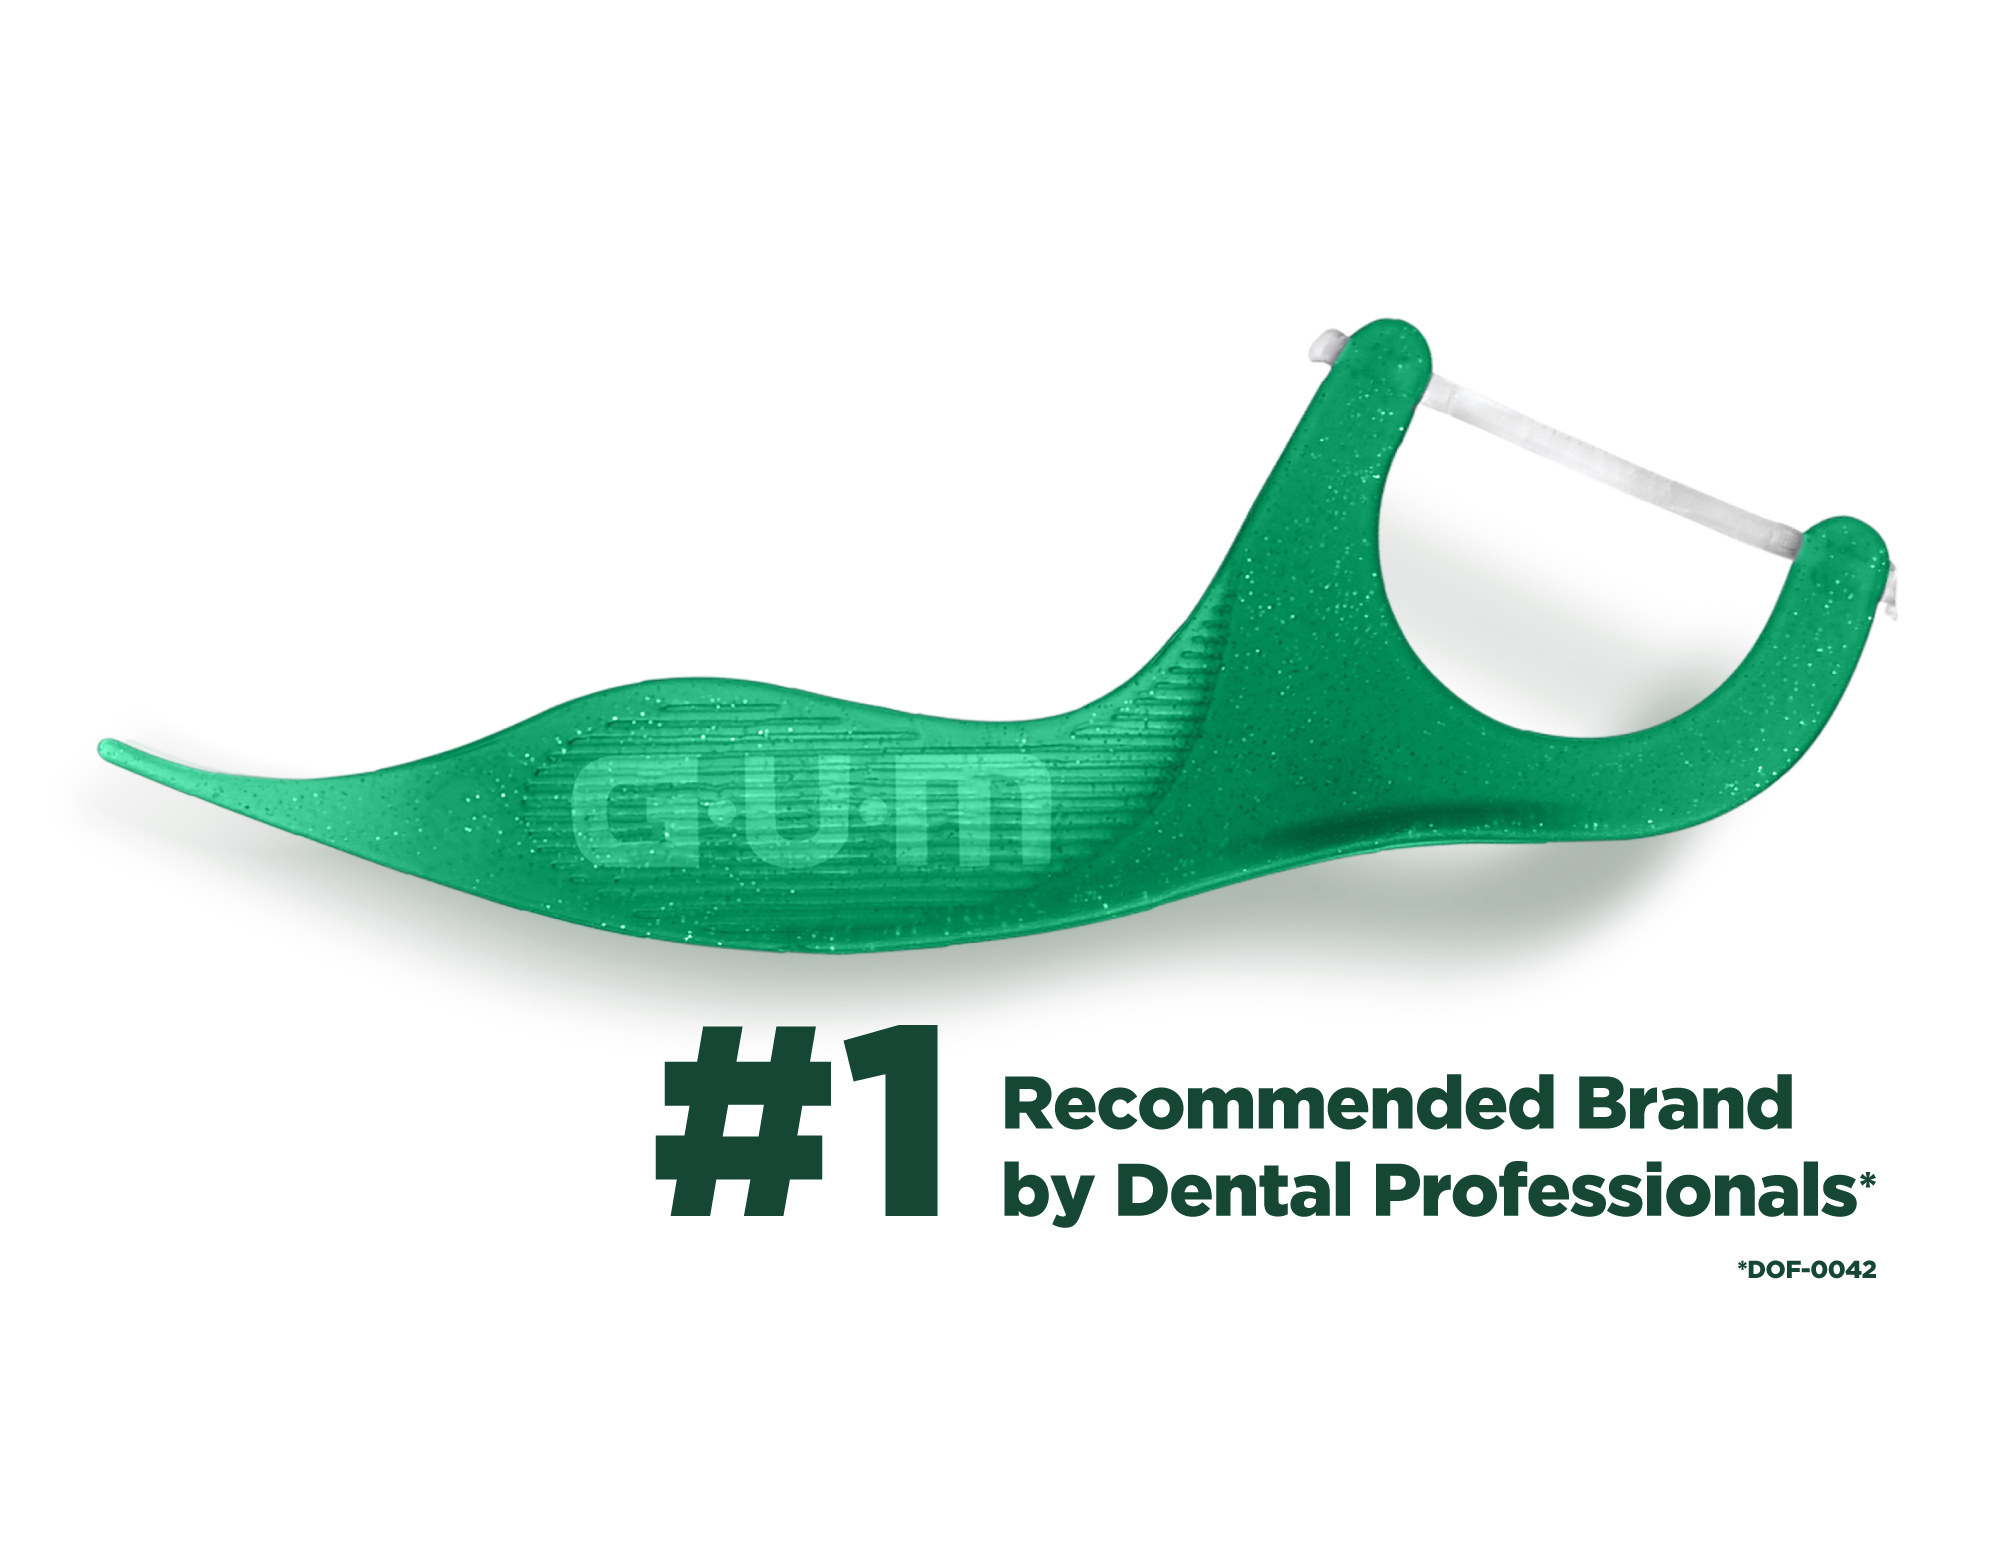 #1 Recommended brand by Dental Professionals